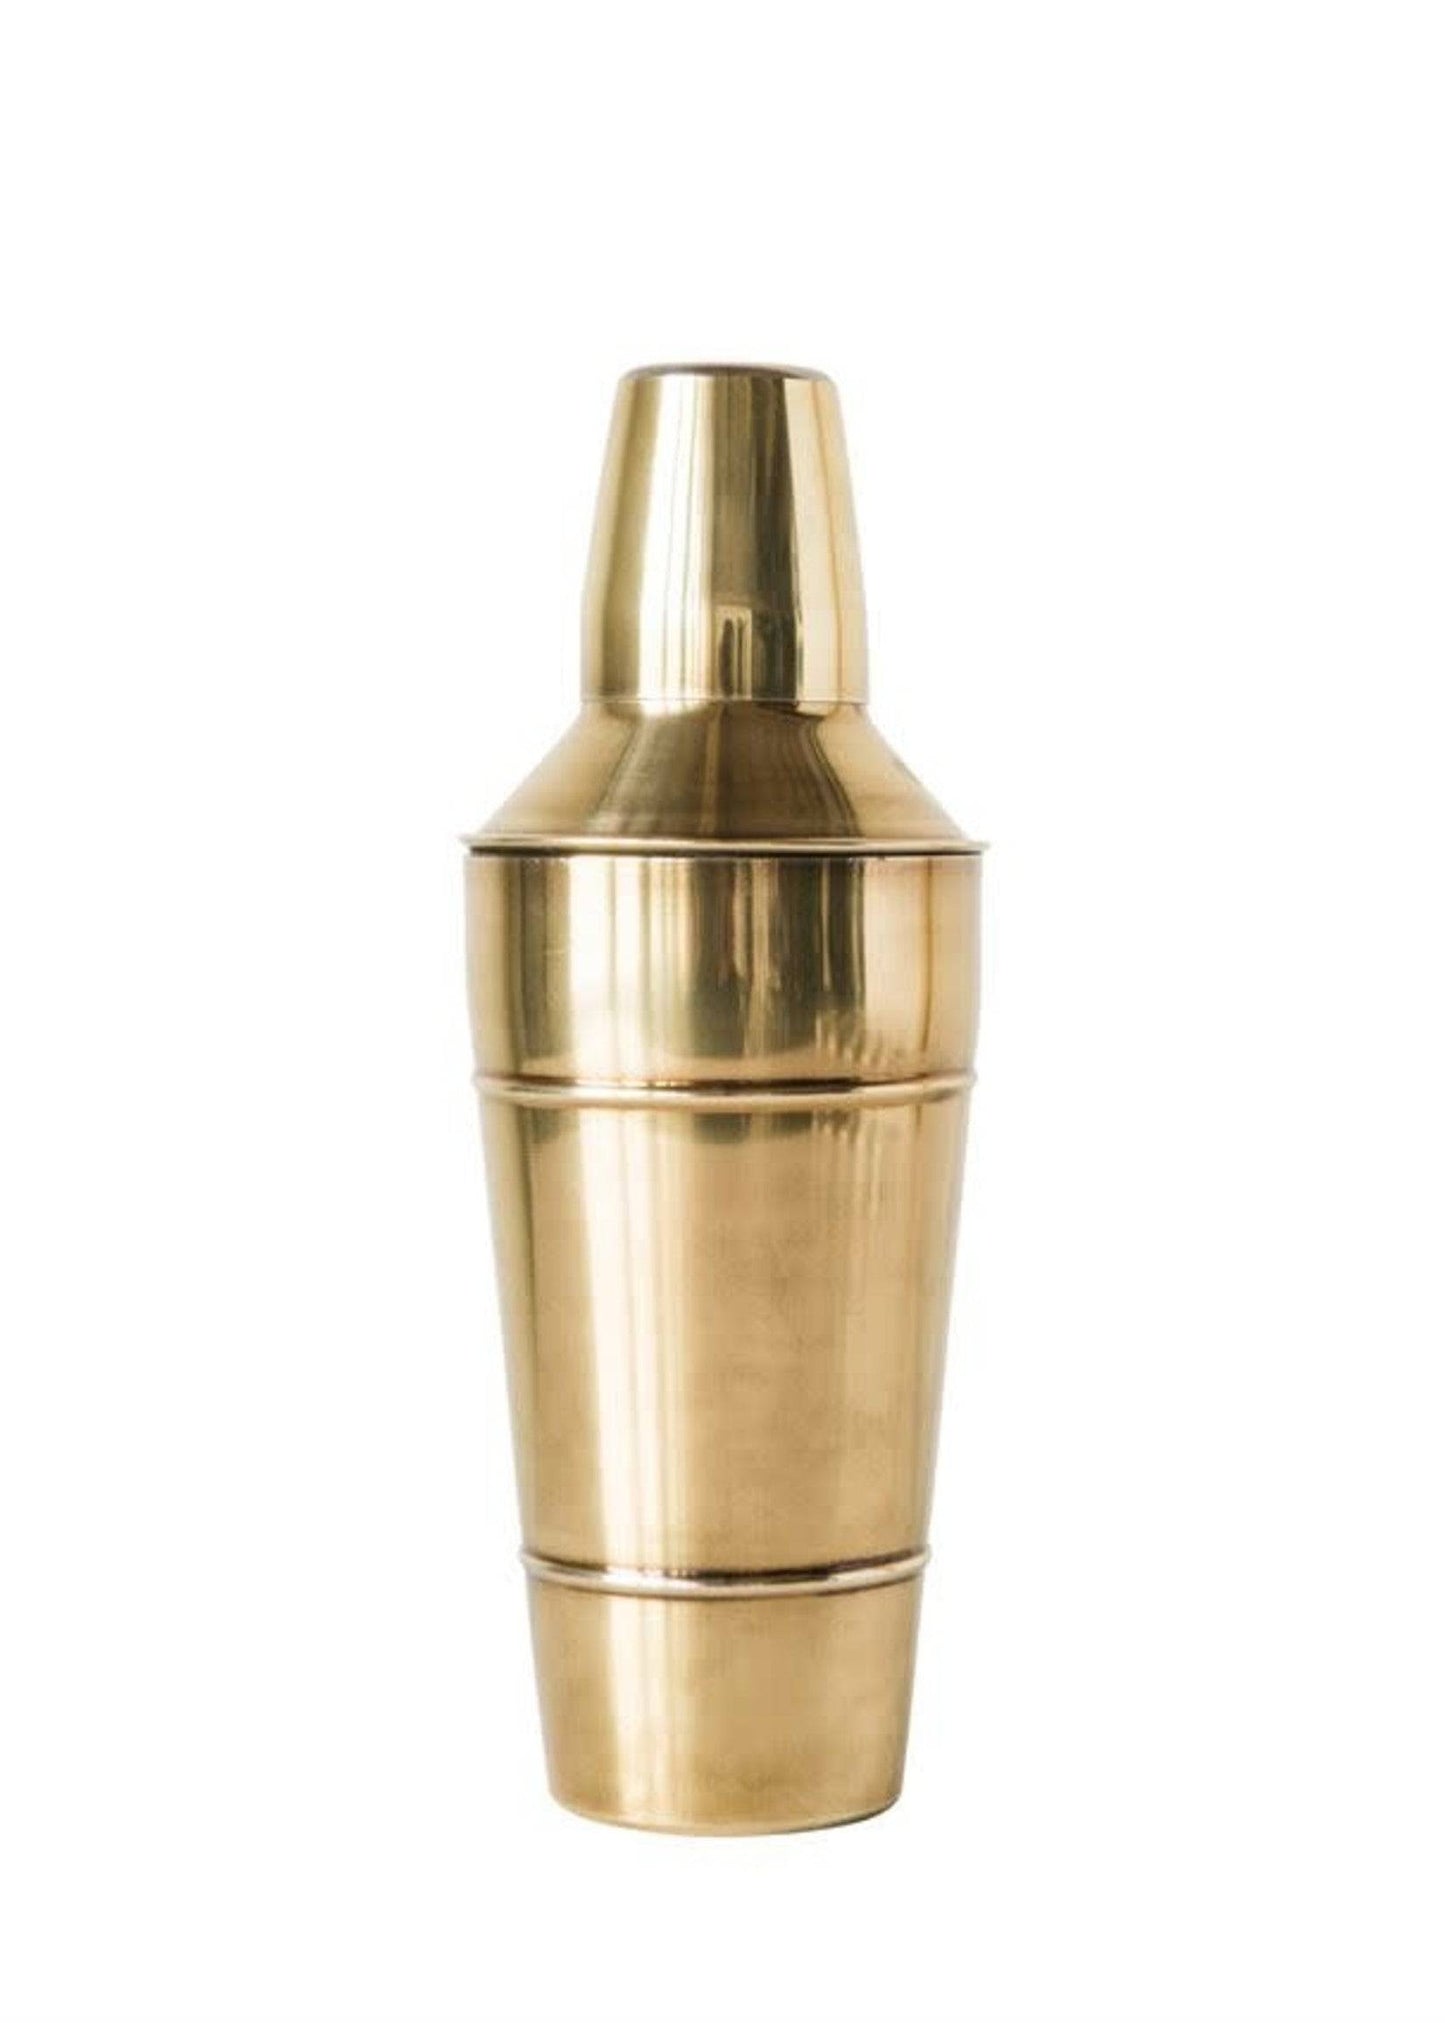 GOLD COCKTAIL SHAKER - Findlay Rowe Designs